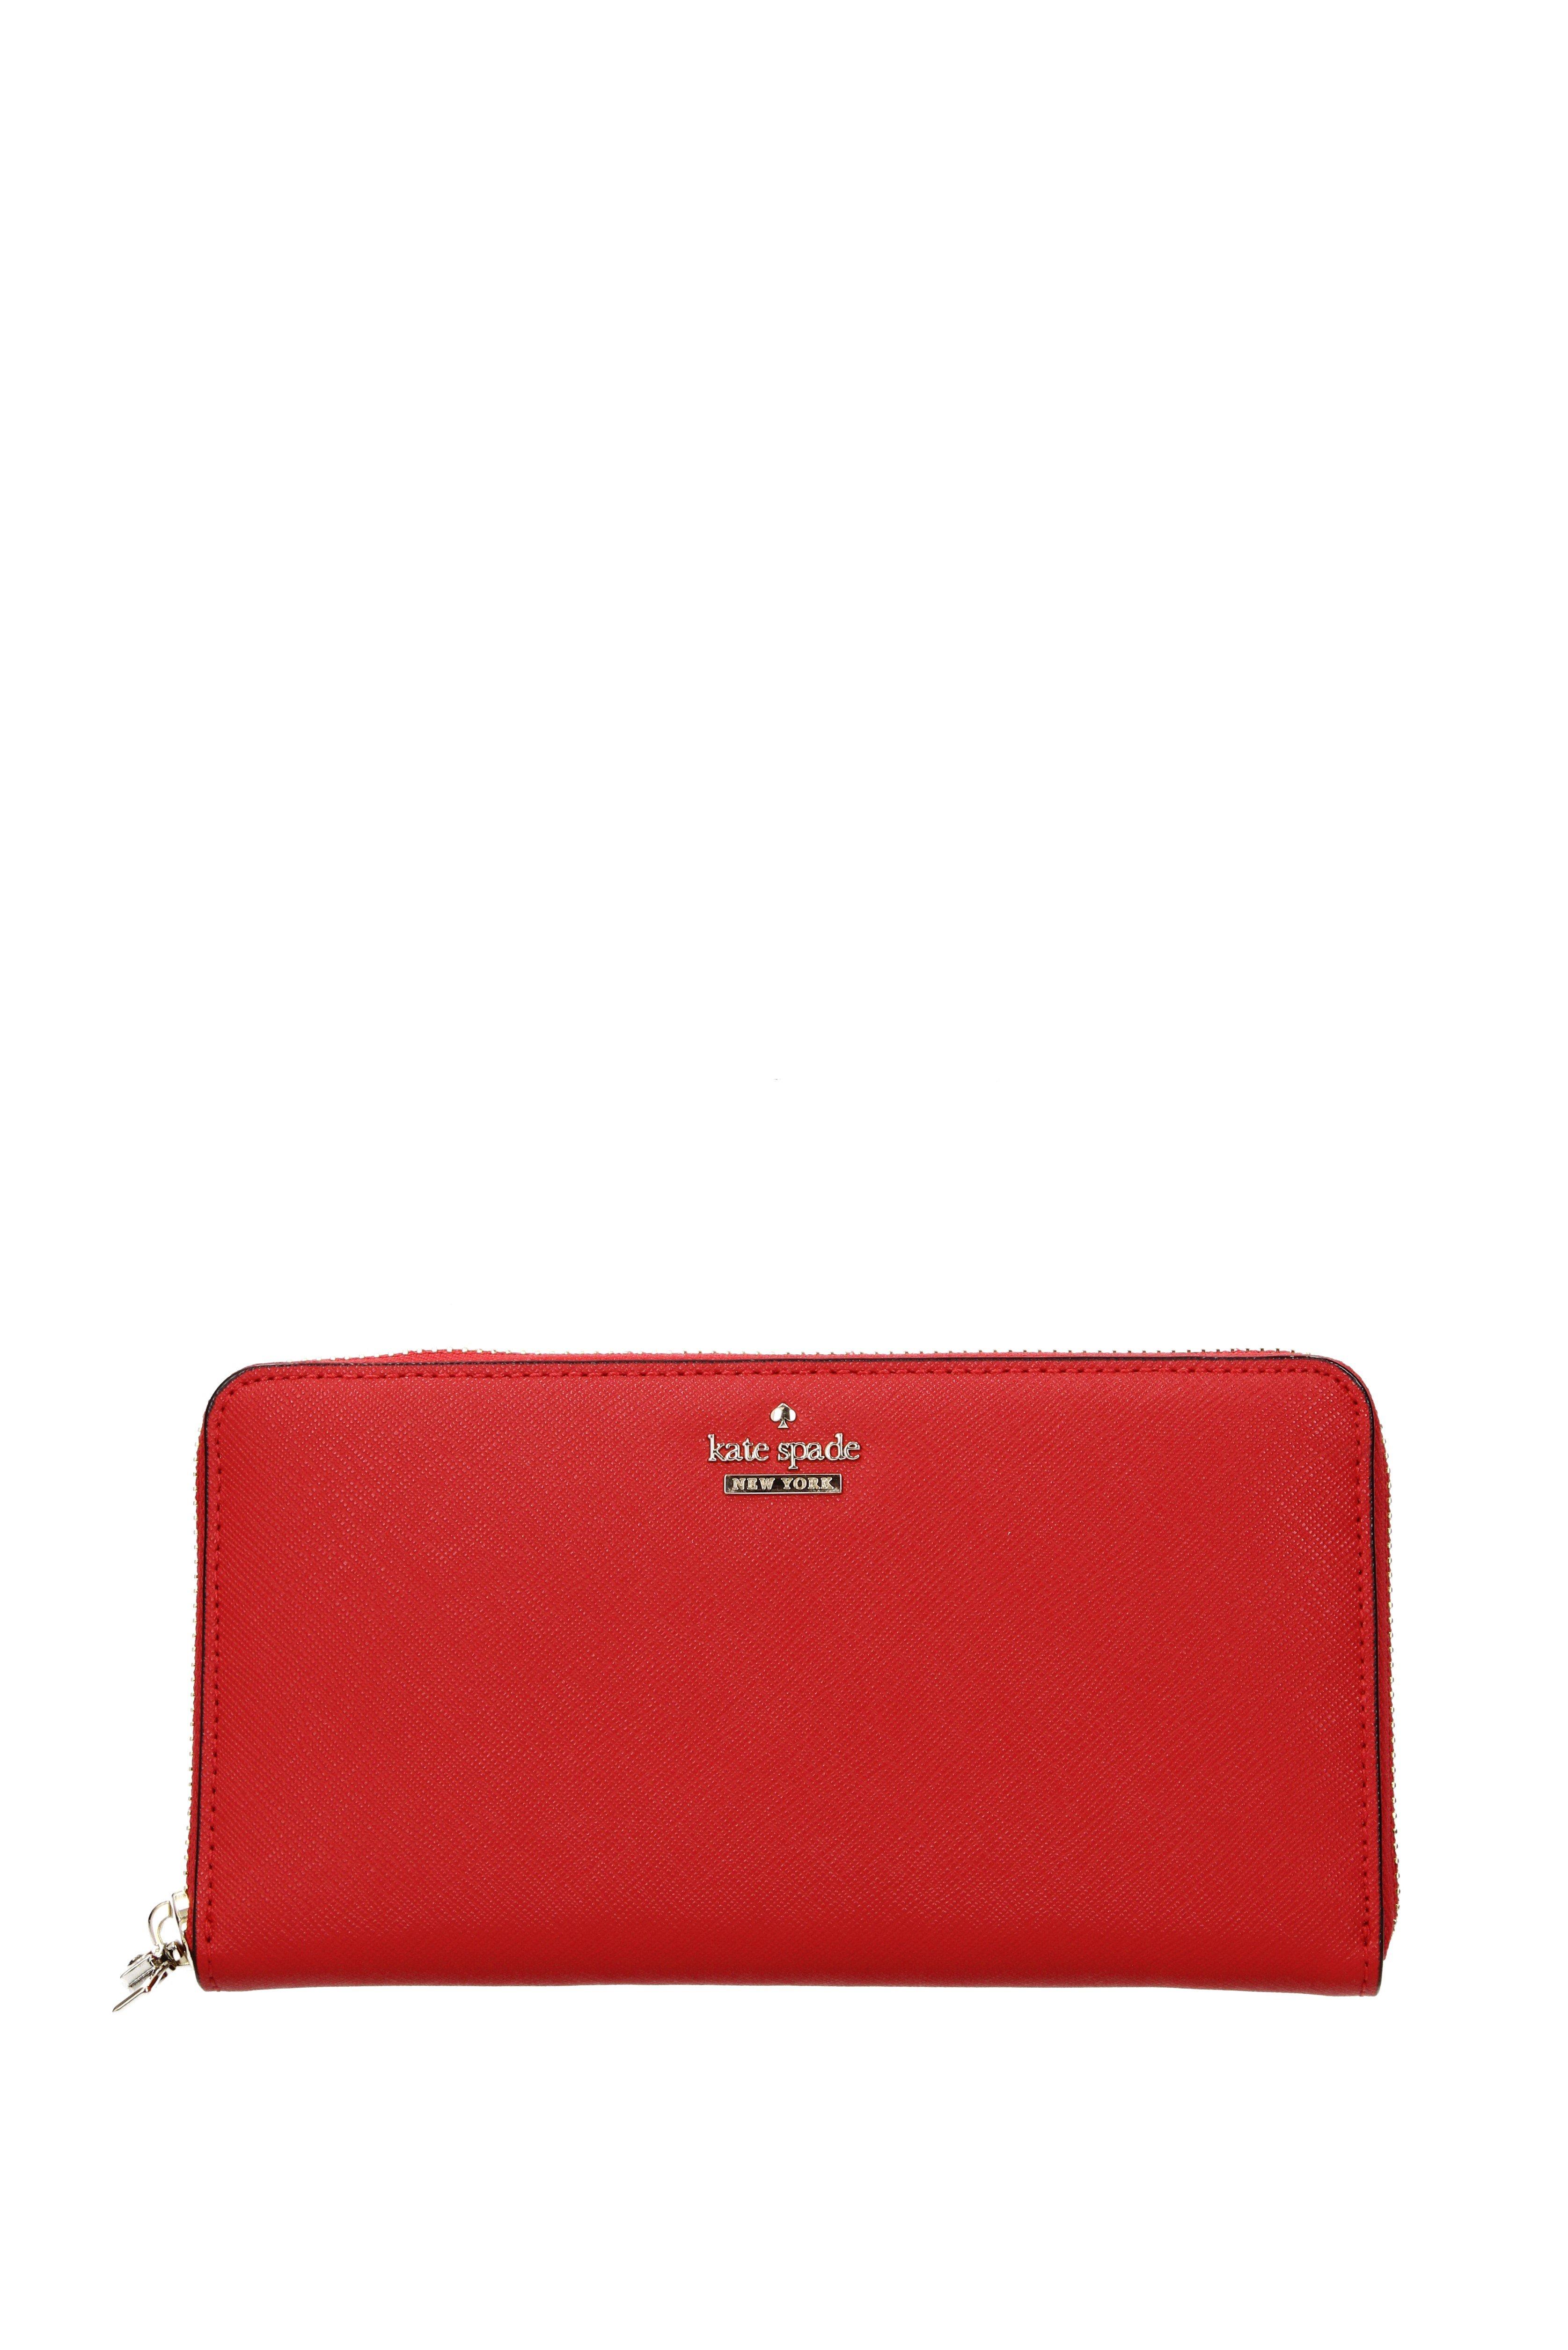 Kate Spade Red Wallets - Lyst